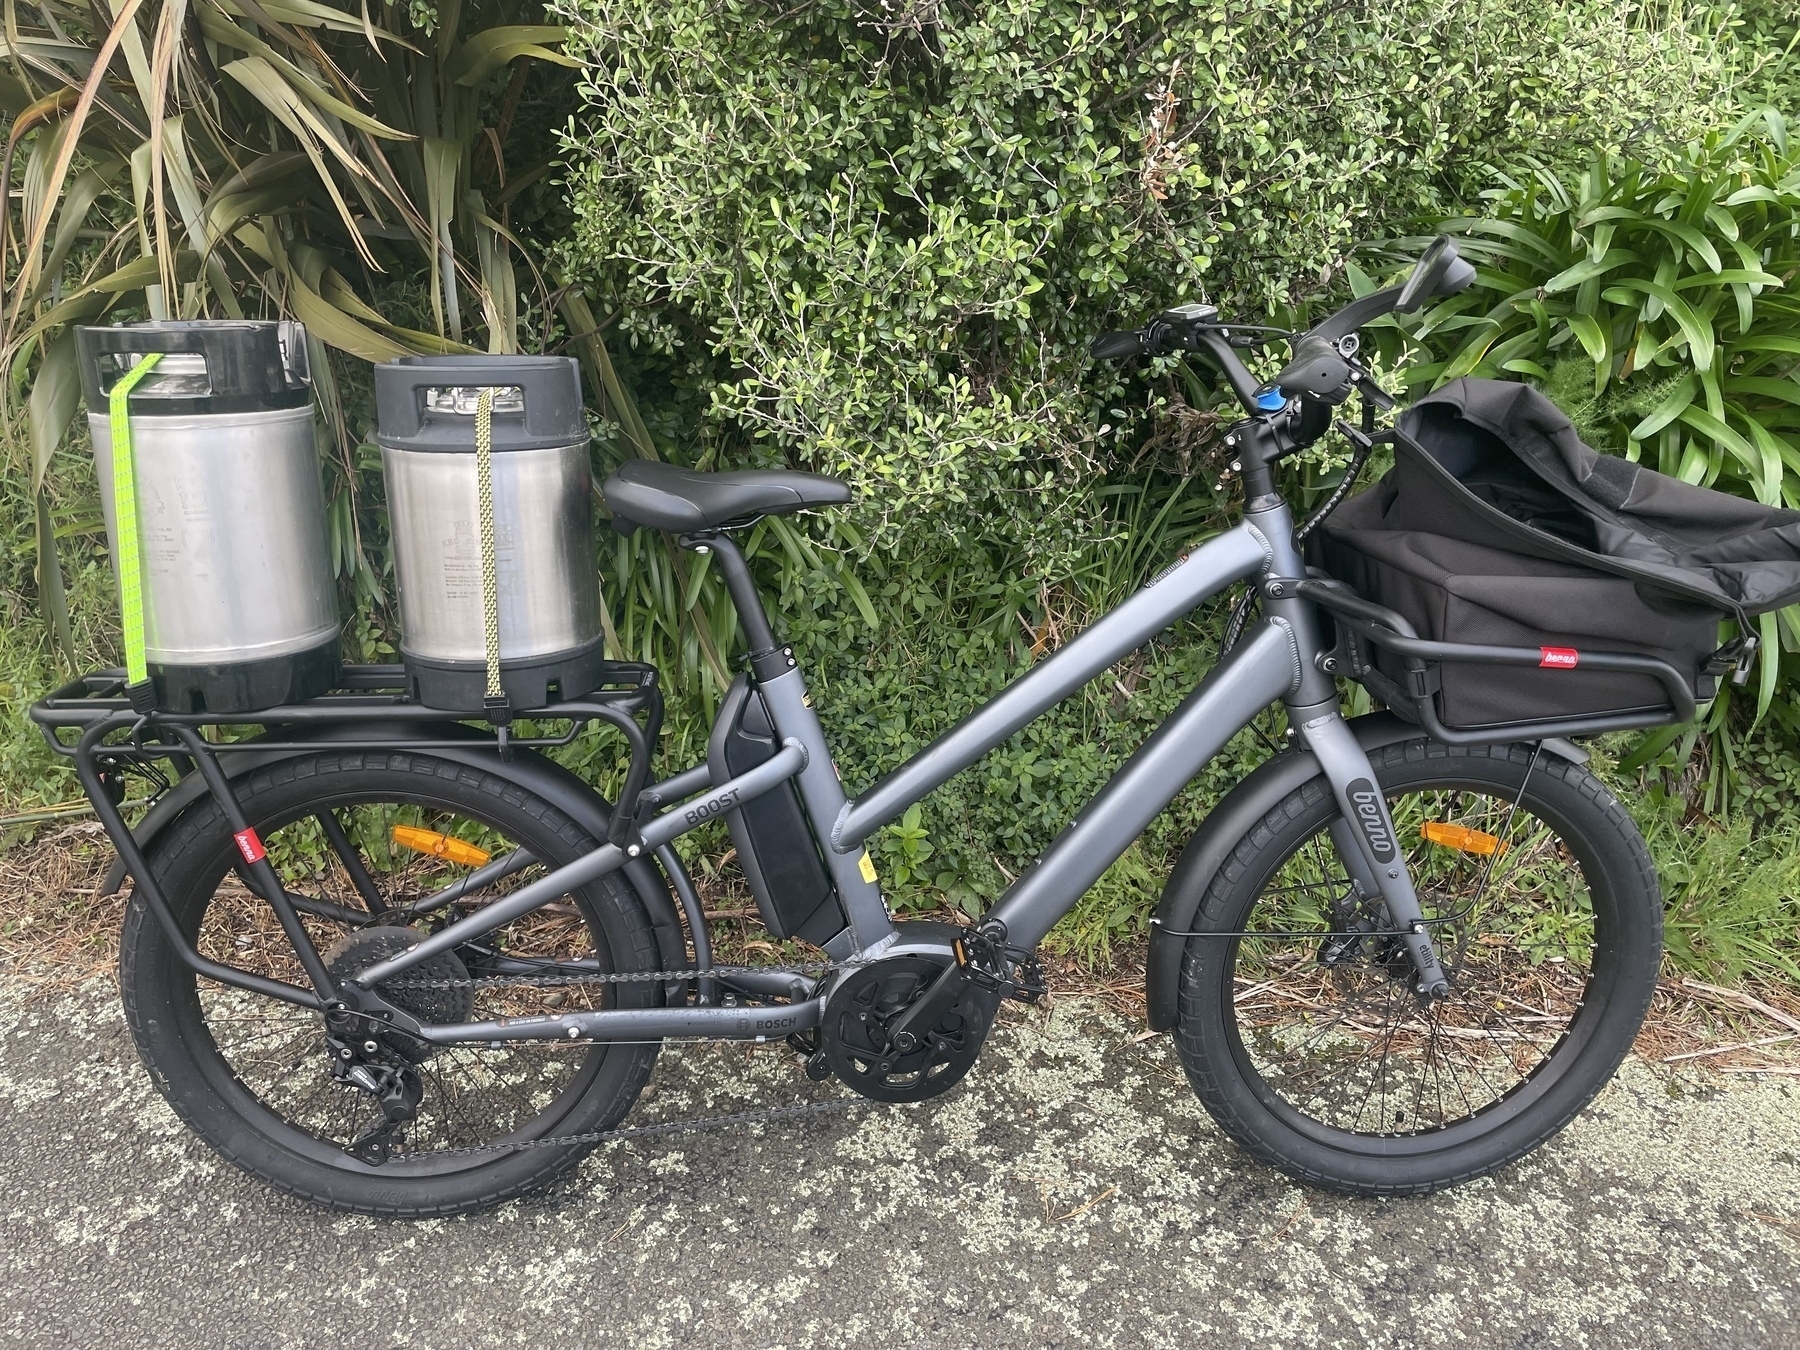 My dark grey step-through Benno Boost cargo eBike. On the rear rack are two beer kegs. The front rack has my front basket bag which holds a week’s shopping. It is a normal shaped bike with slightly smaller wheels so although it is long, it fits in places most normal bikes would. 